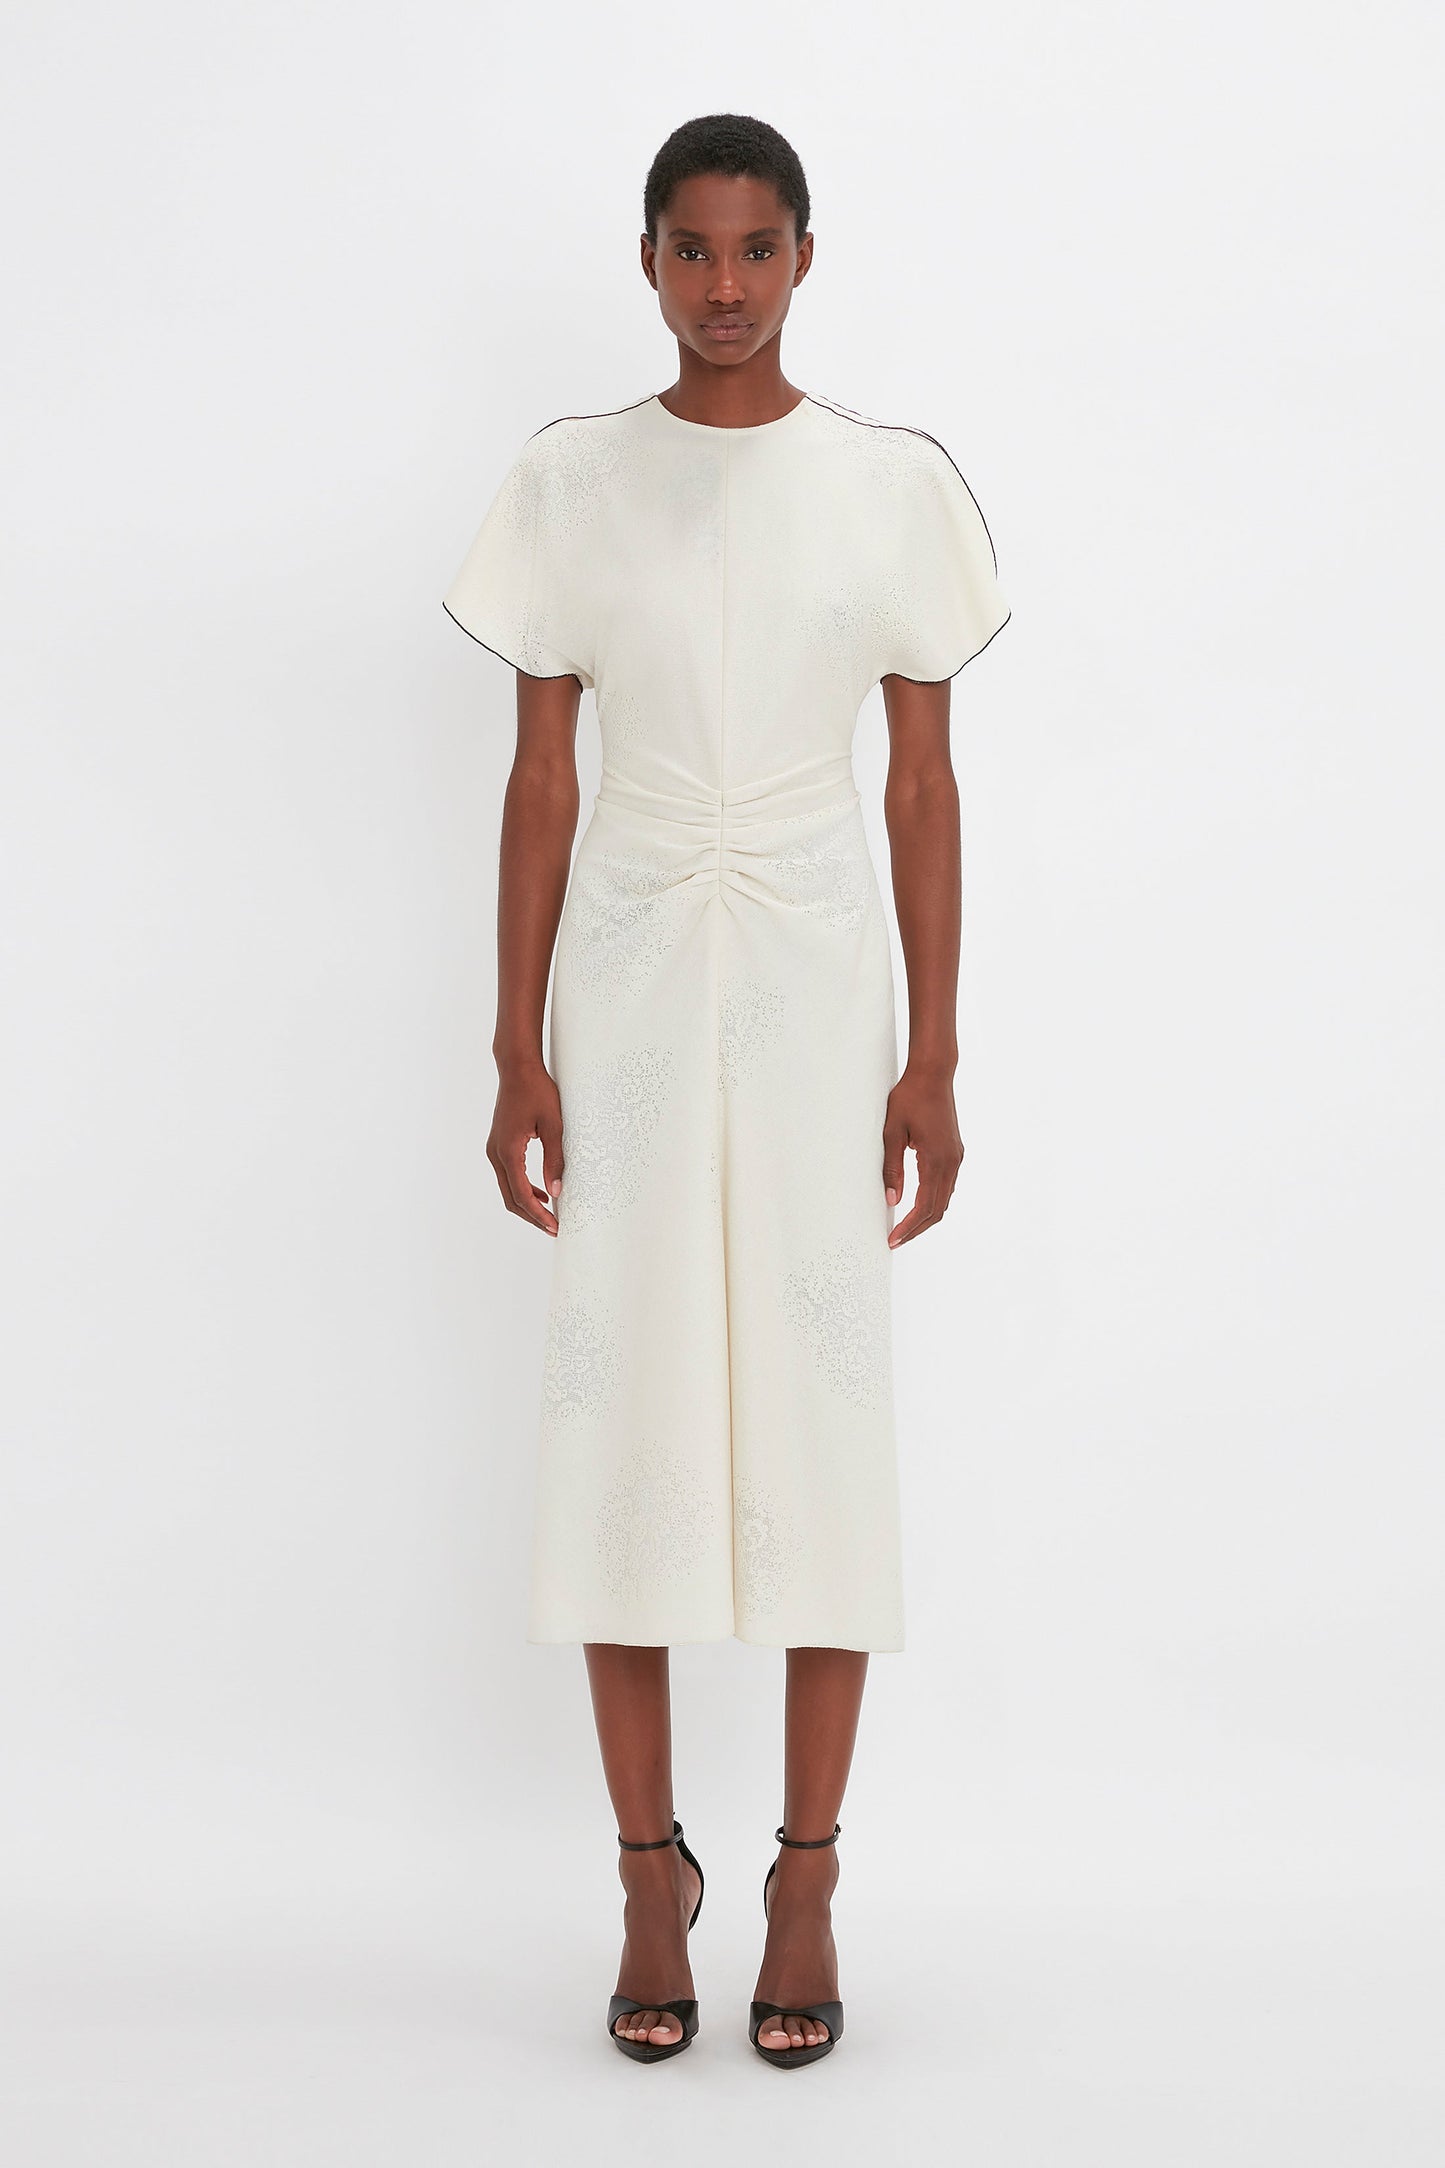 A woman stands facing forward, wearing a Victoria Beckham white embroidered gathered waist midi dress in cream with short sleeves and black strappy heels, on a plain white background.